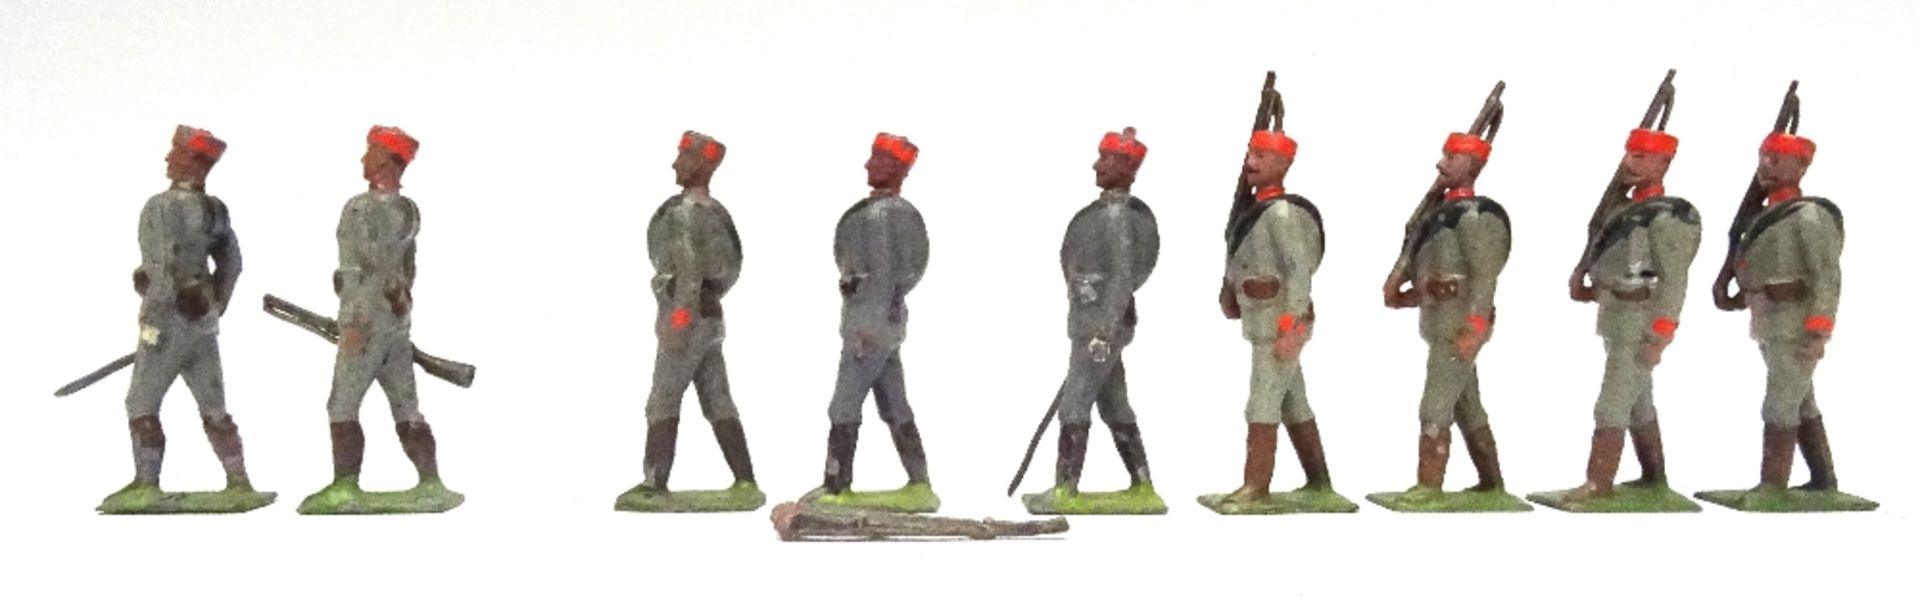 Britains from set 174 Montenegrin Infantry - Image 5 of 7